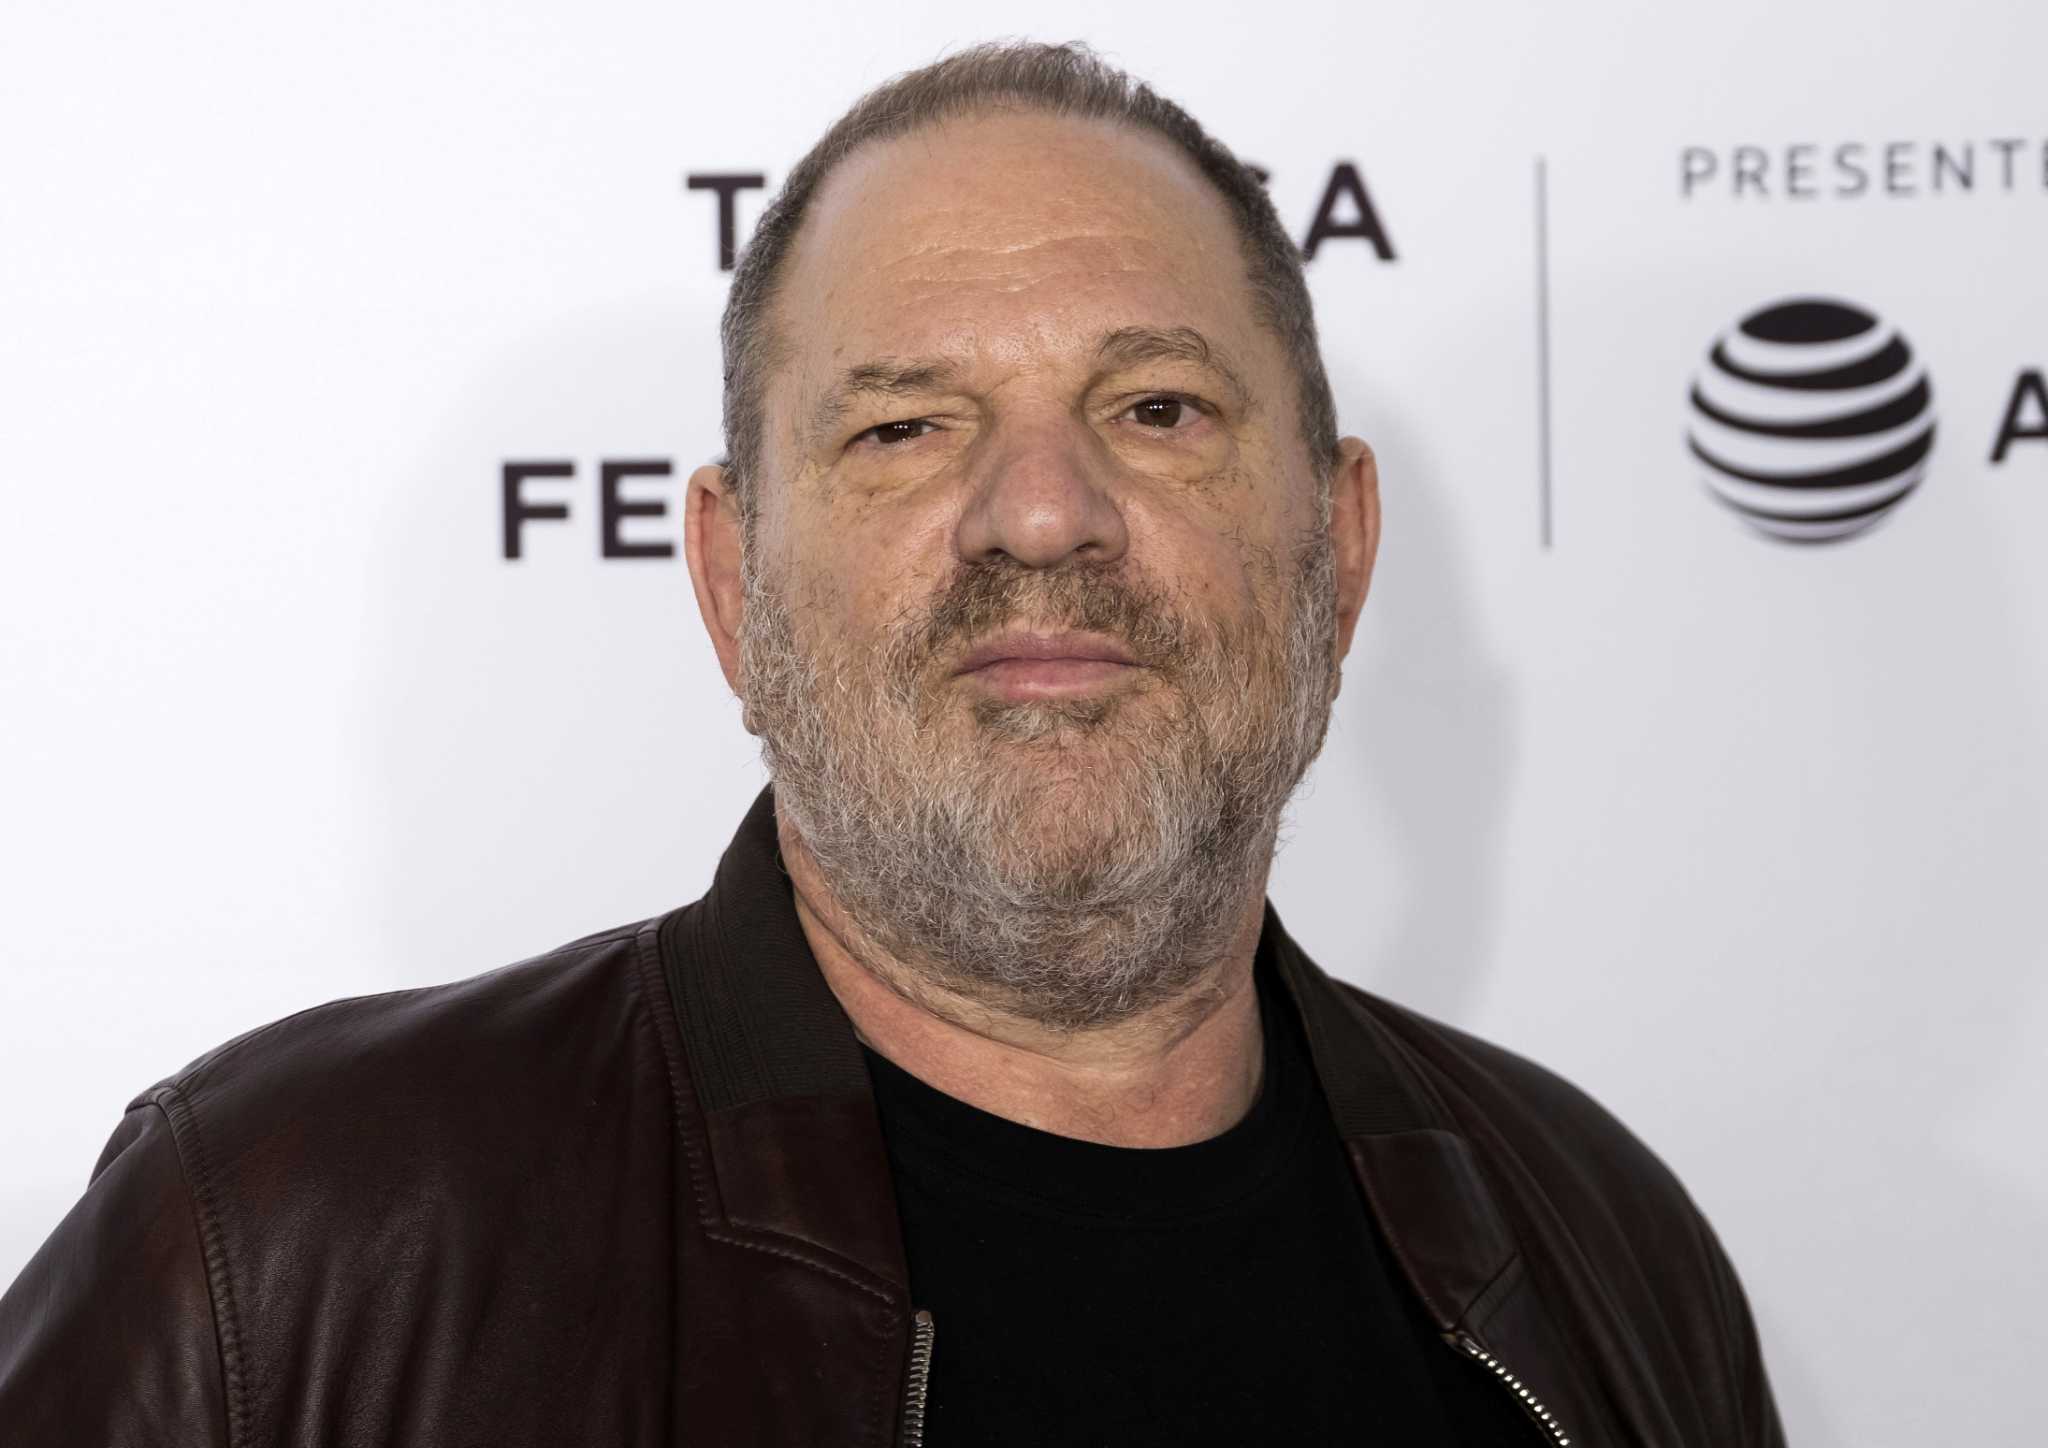 Weinstein ousted from company in wake of scandal